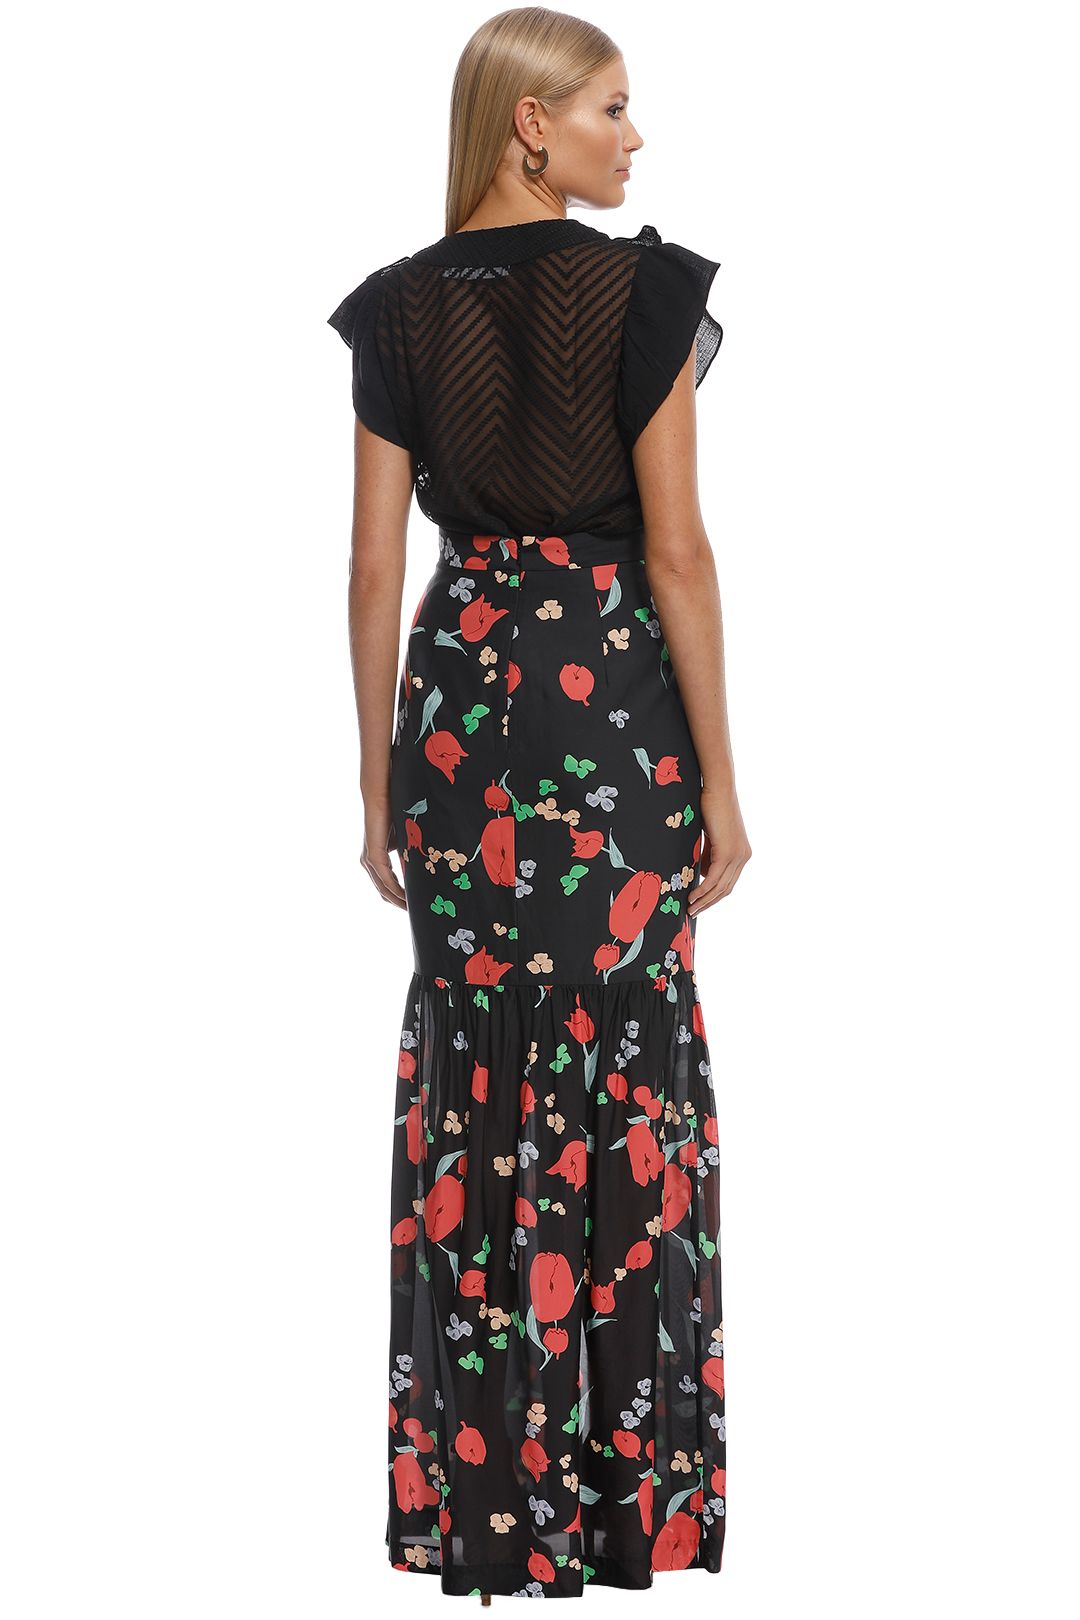 Alice McCall - Move Over Skirt - Black Floral - Back